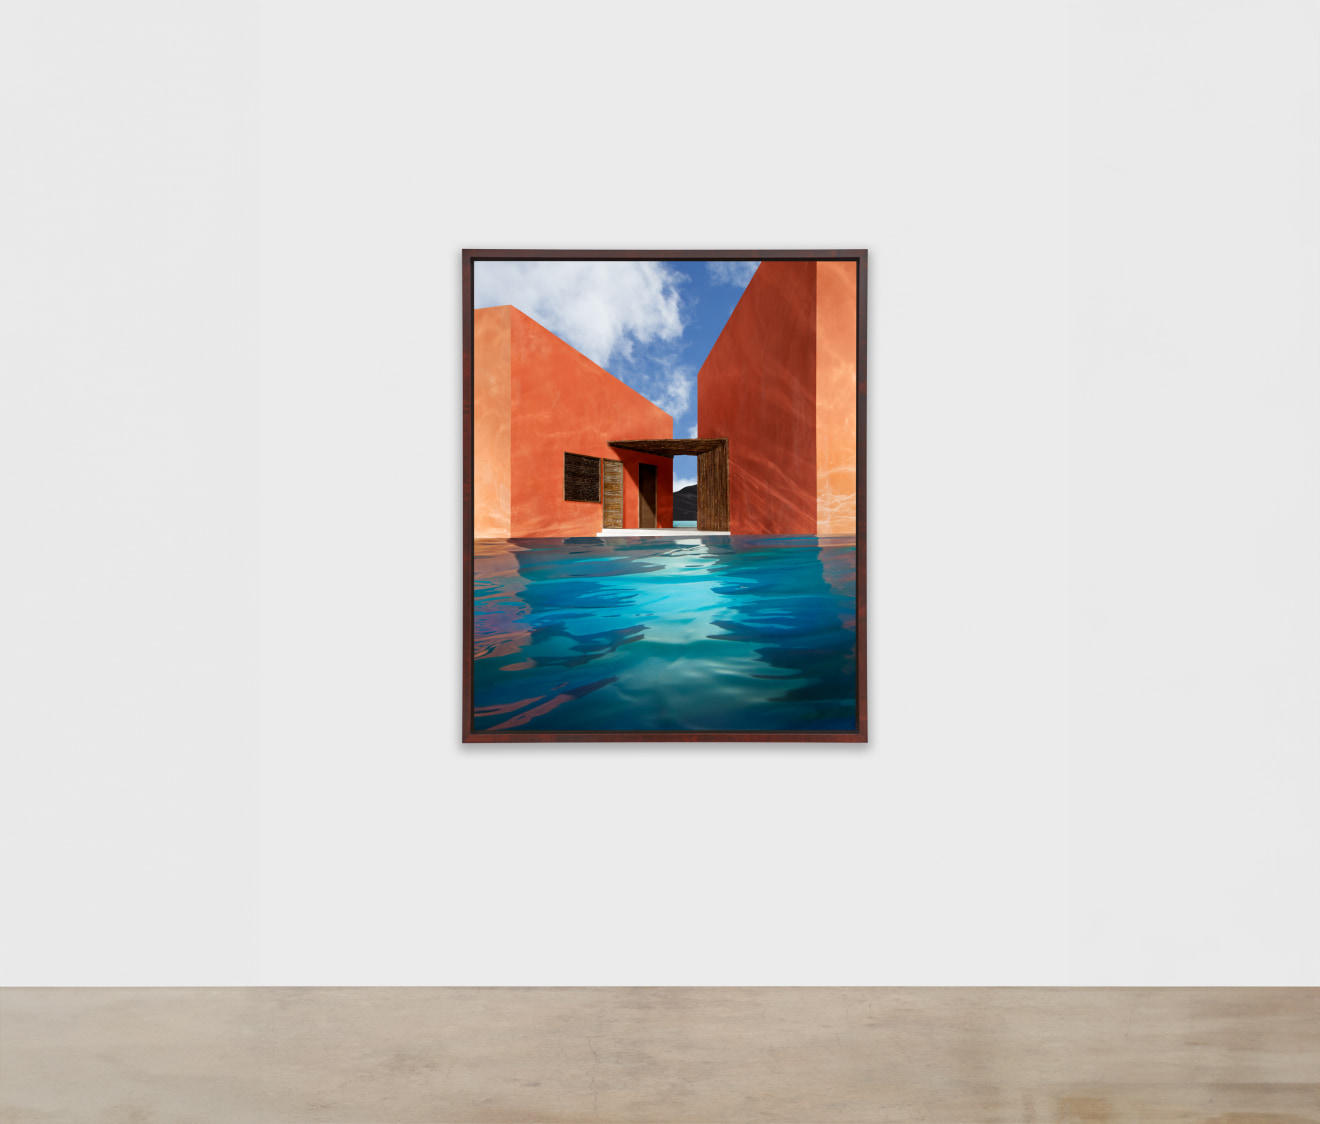 James Casebere,&nbsp;Patio with Blue Sky, 2024, framed archival pigment print mounted to Dibond, paper: 57 3/4 x 46 3/4 framed: 60 9/16 x 49 9/16 x 2 1/4 inches&nbsp;&copy; James&nbsp;Casebere Courtesy: the artist and Sean Kelly, New York/Los Angeles